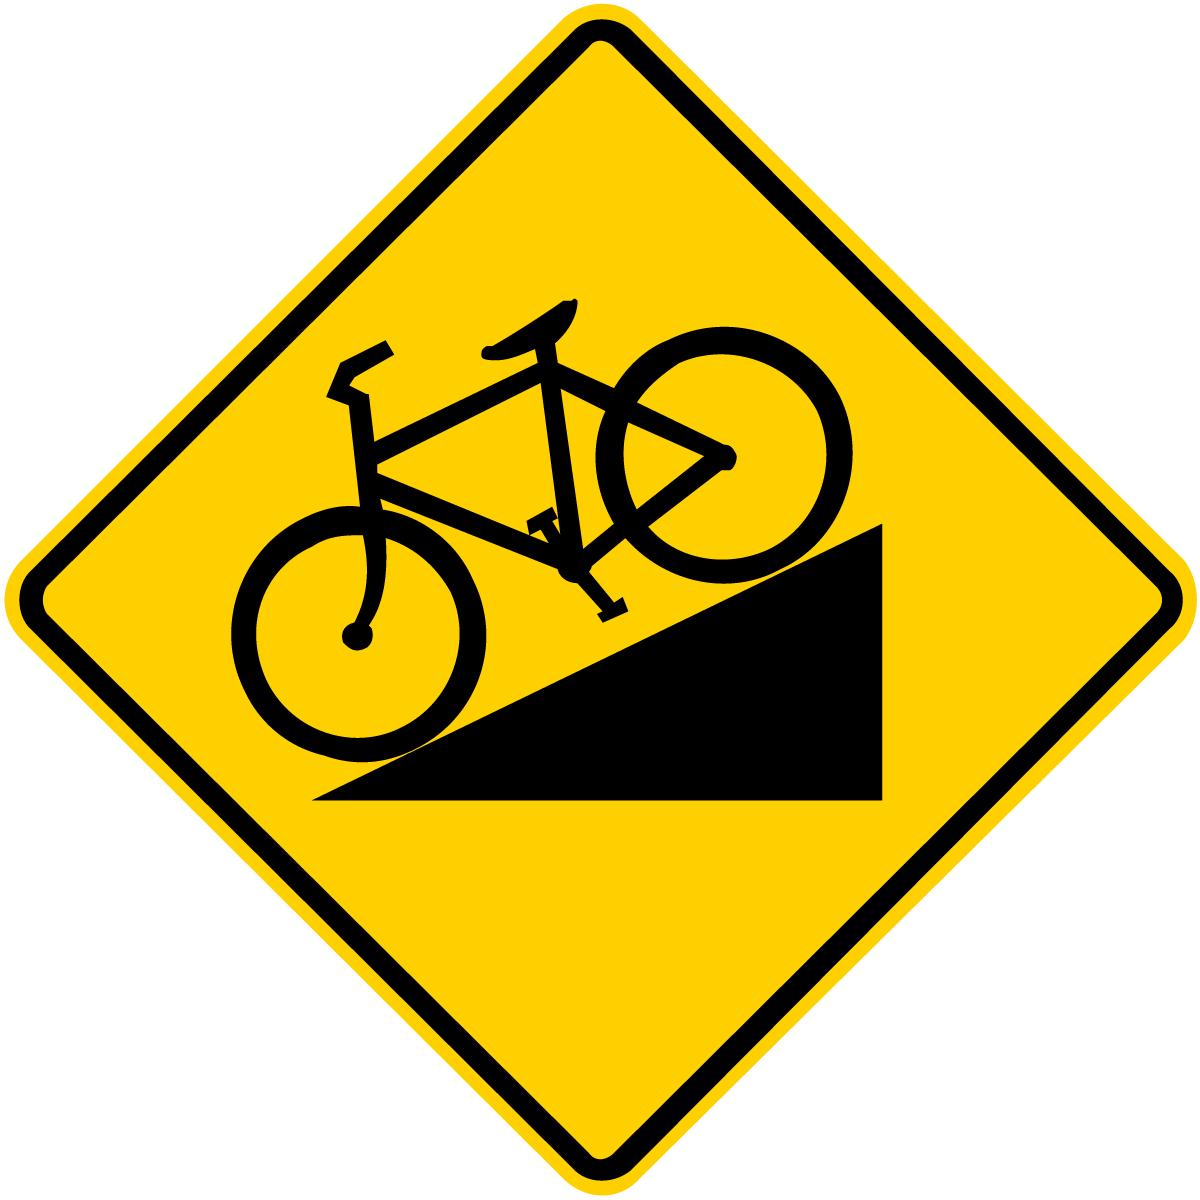 W7-5 Hill (Bicycle)